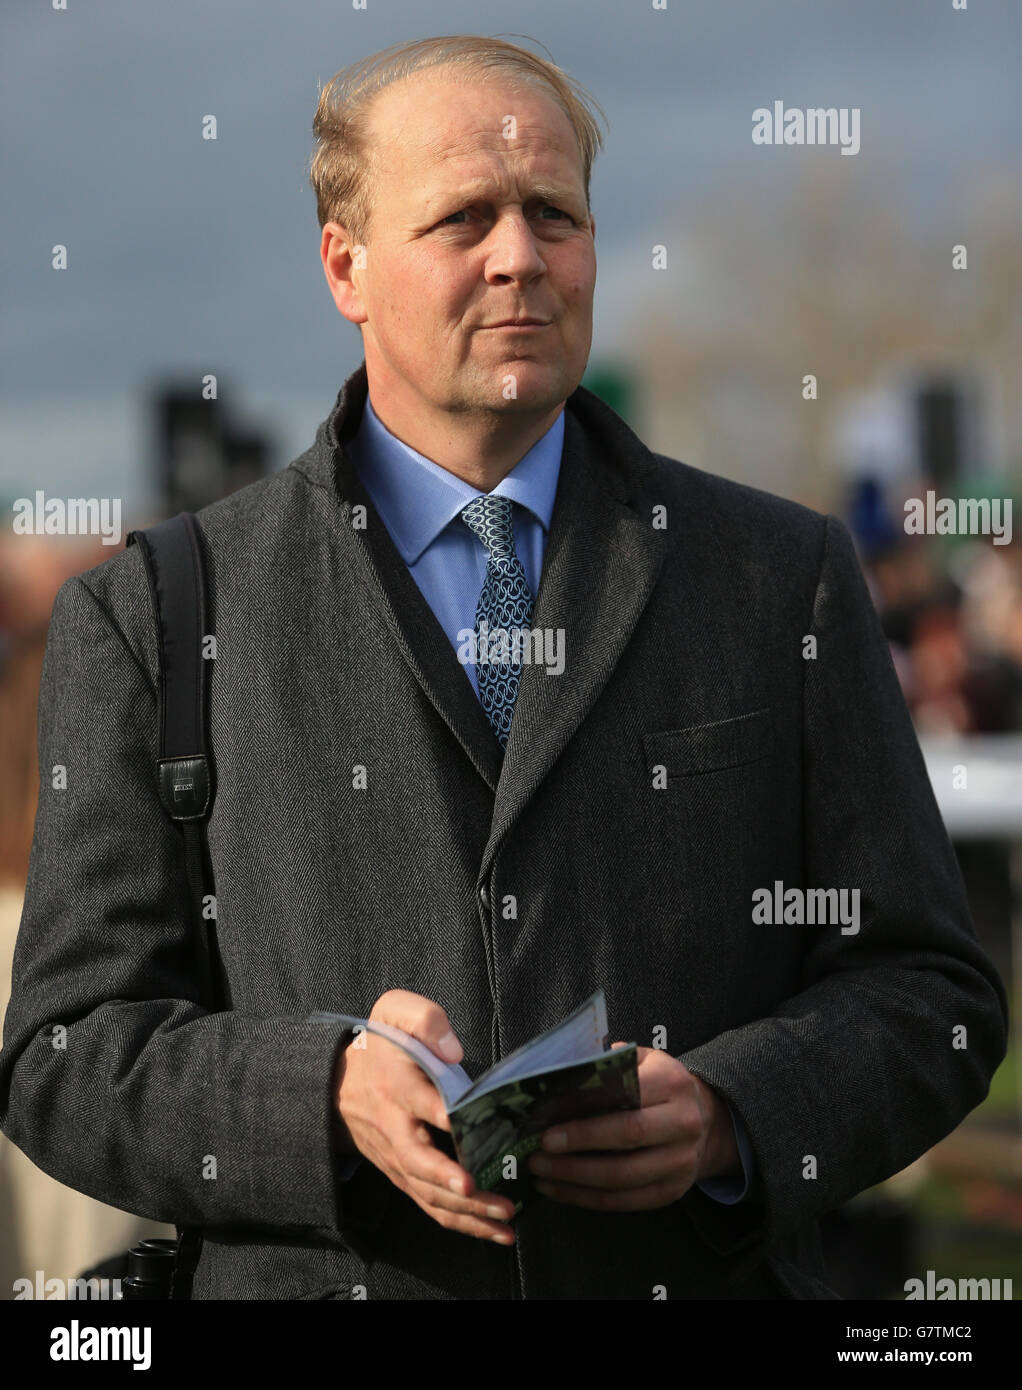 Trainer Ed Dunlop at Doncaster Racecourse. PRESS ASSOCIATION Photo. Picture date Saturday March 28, 2015. See PA Story RACING Doncaster. Photo credit should read: Nick Potts/PA Wire. Stock Photo